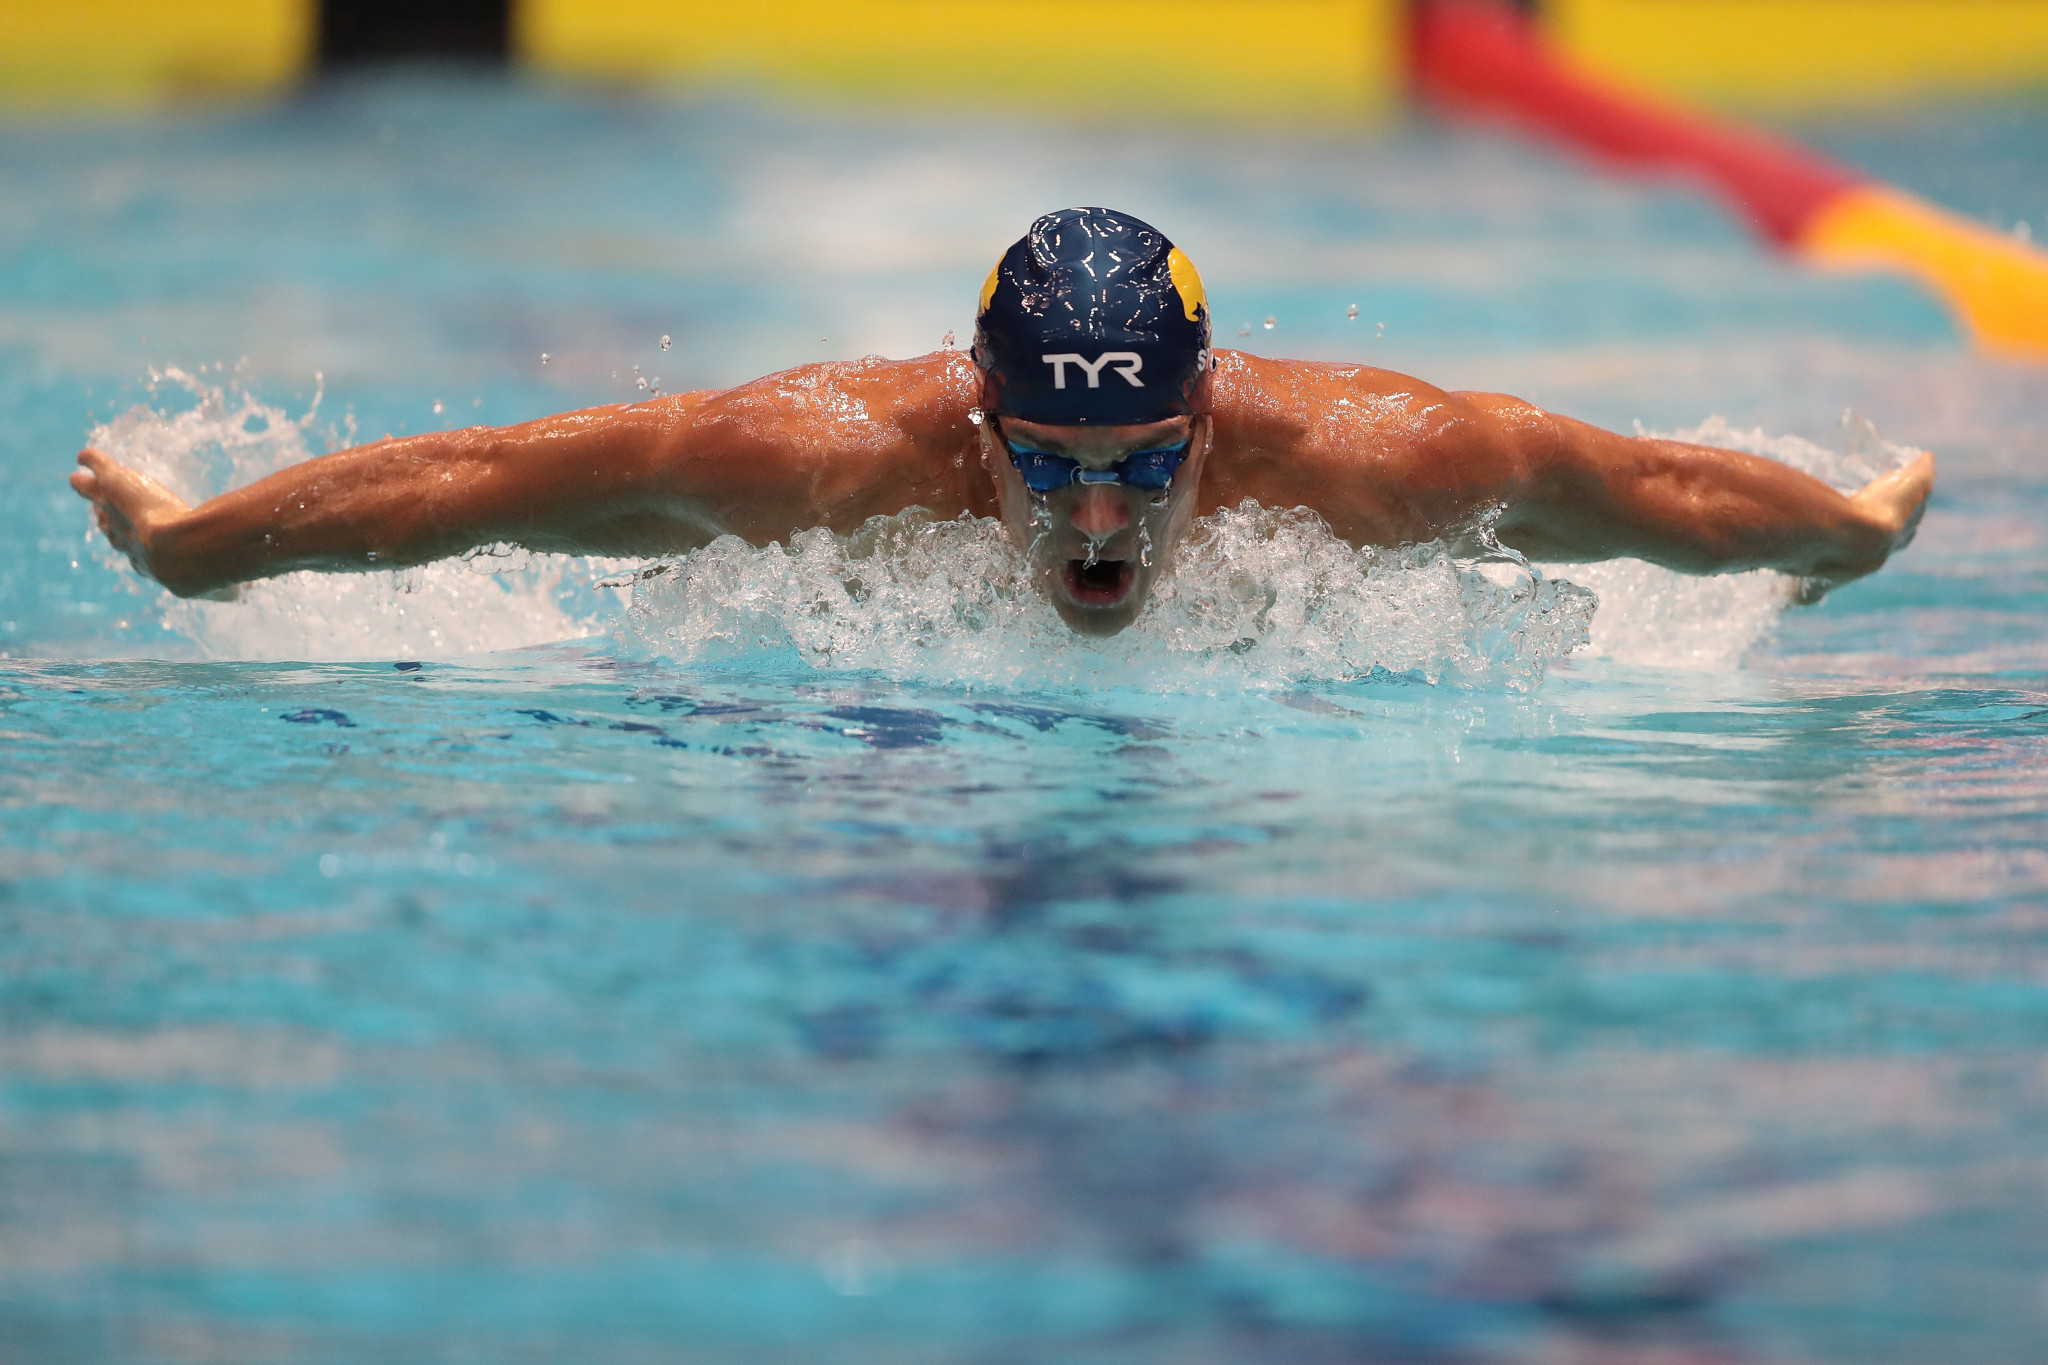 Tom Shields triumphed in the men's 200m event ahead of South Africa's Chad Le Clos ©Getty Images